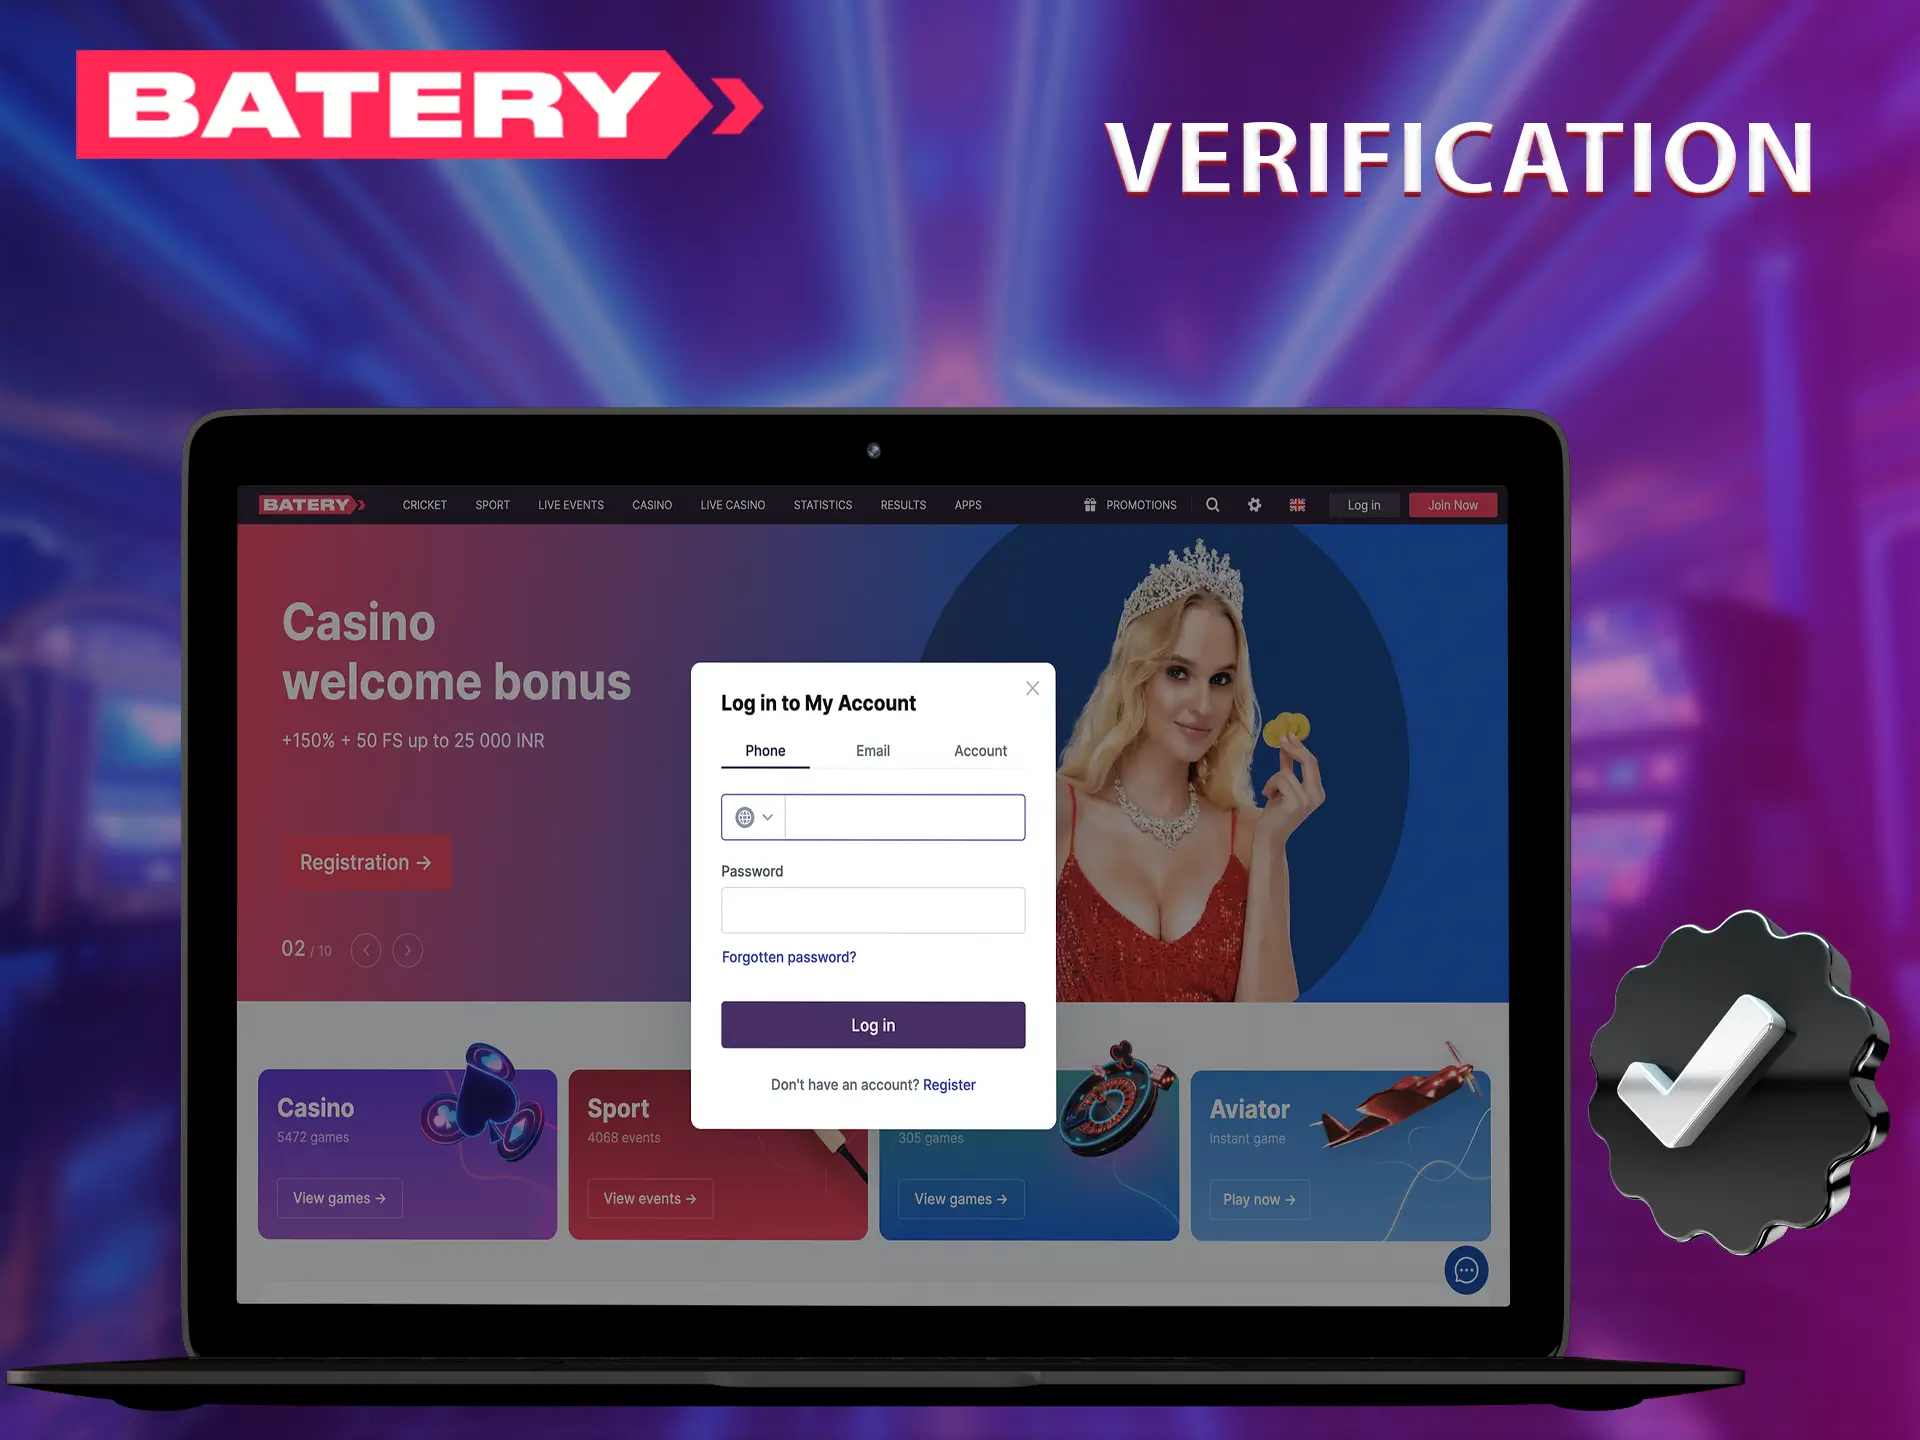 Have your documents ready to verify your account at Batery Casino.